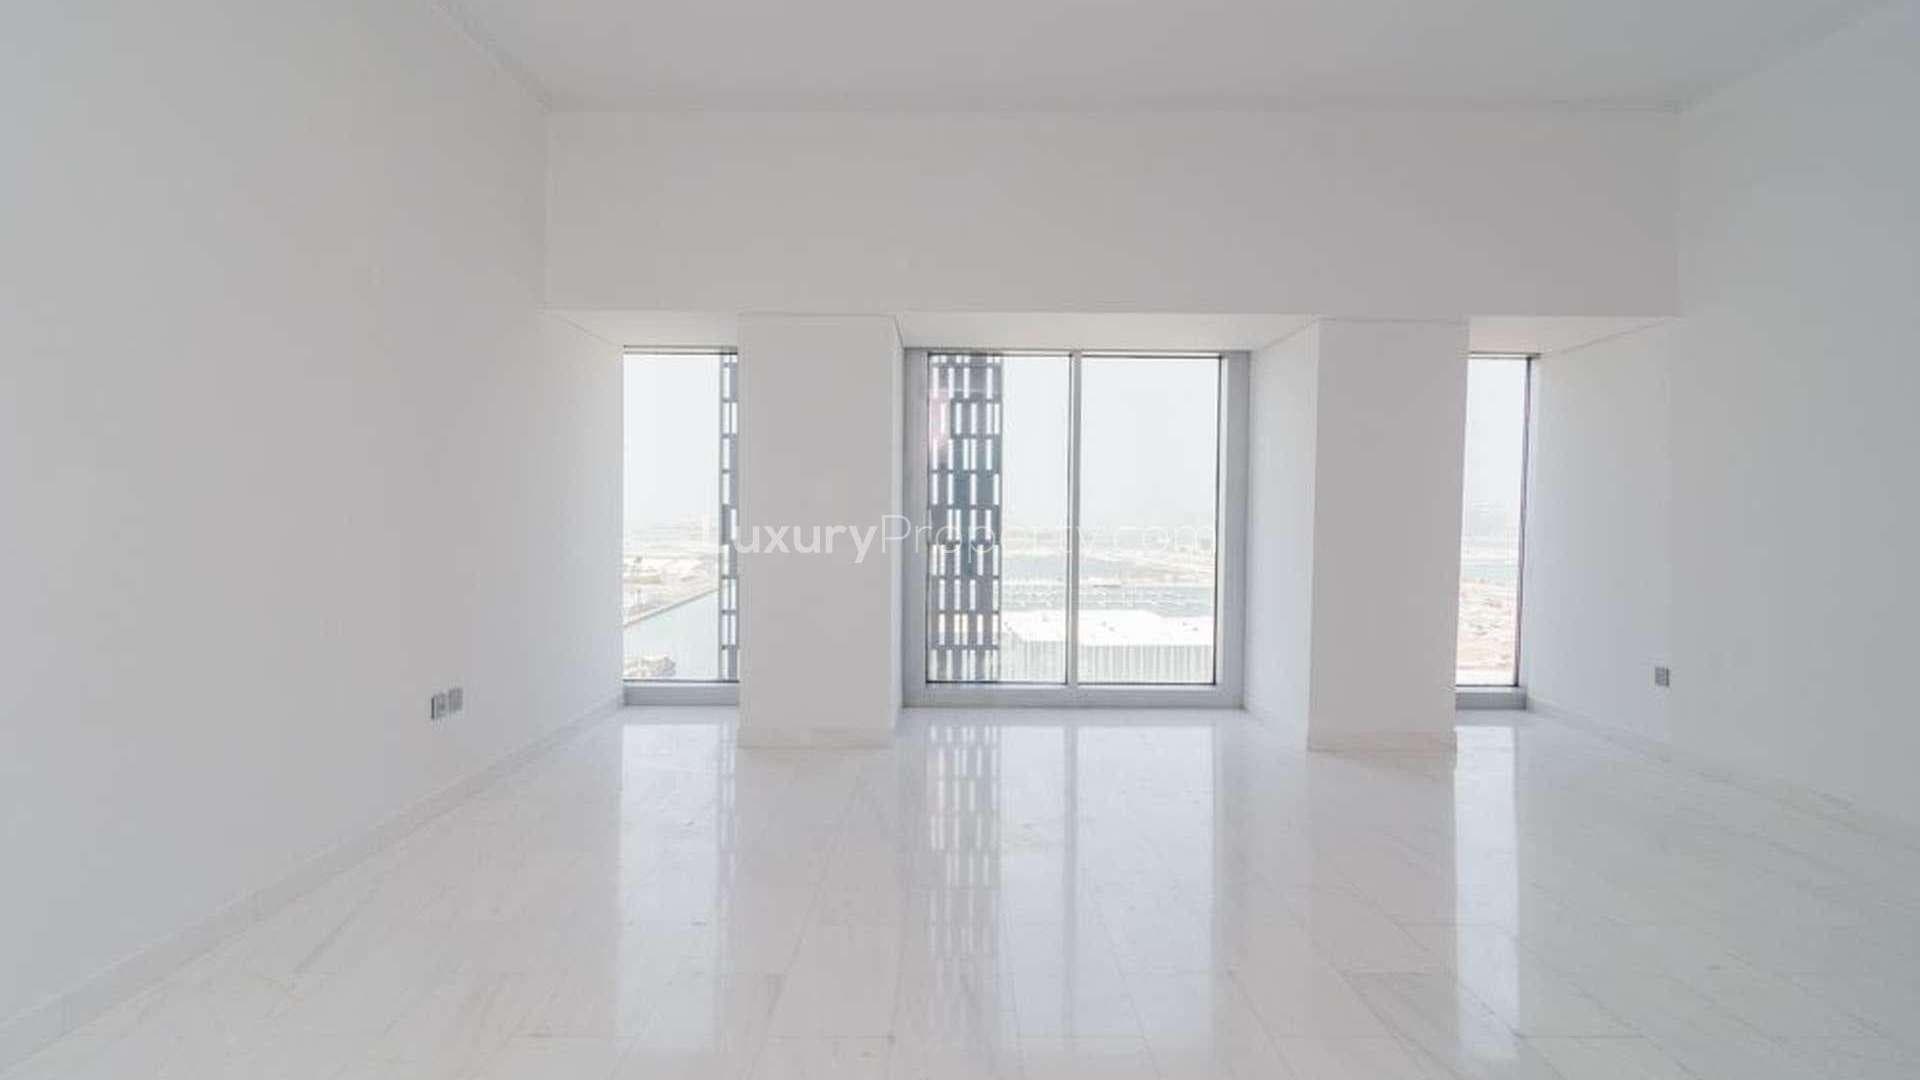 2 Bedroom Apartment For Rent Cayan Tower Lp32719 40c242e469e2700.jpg